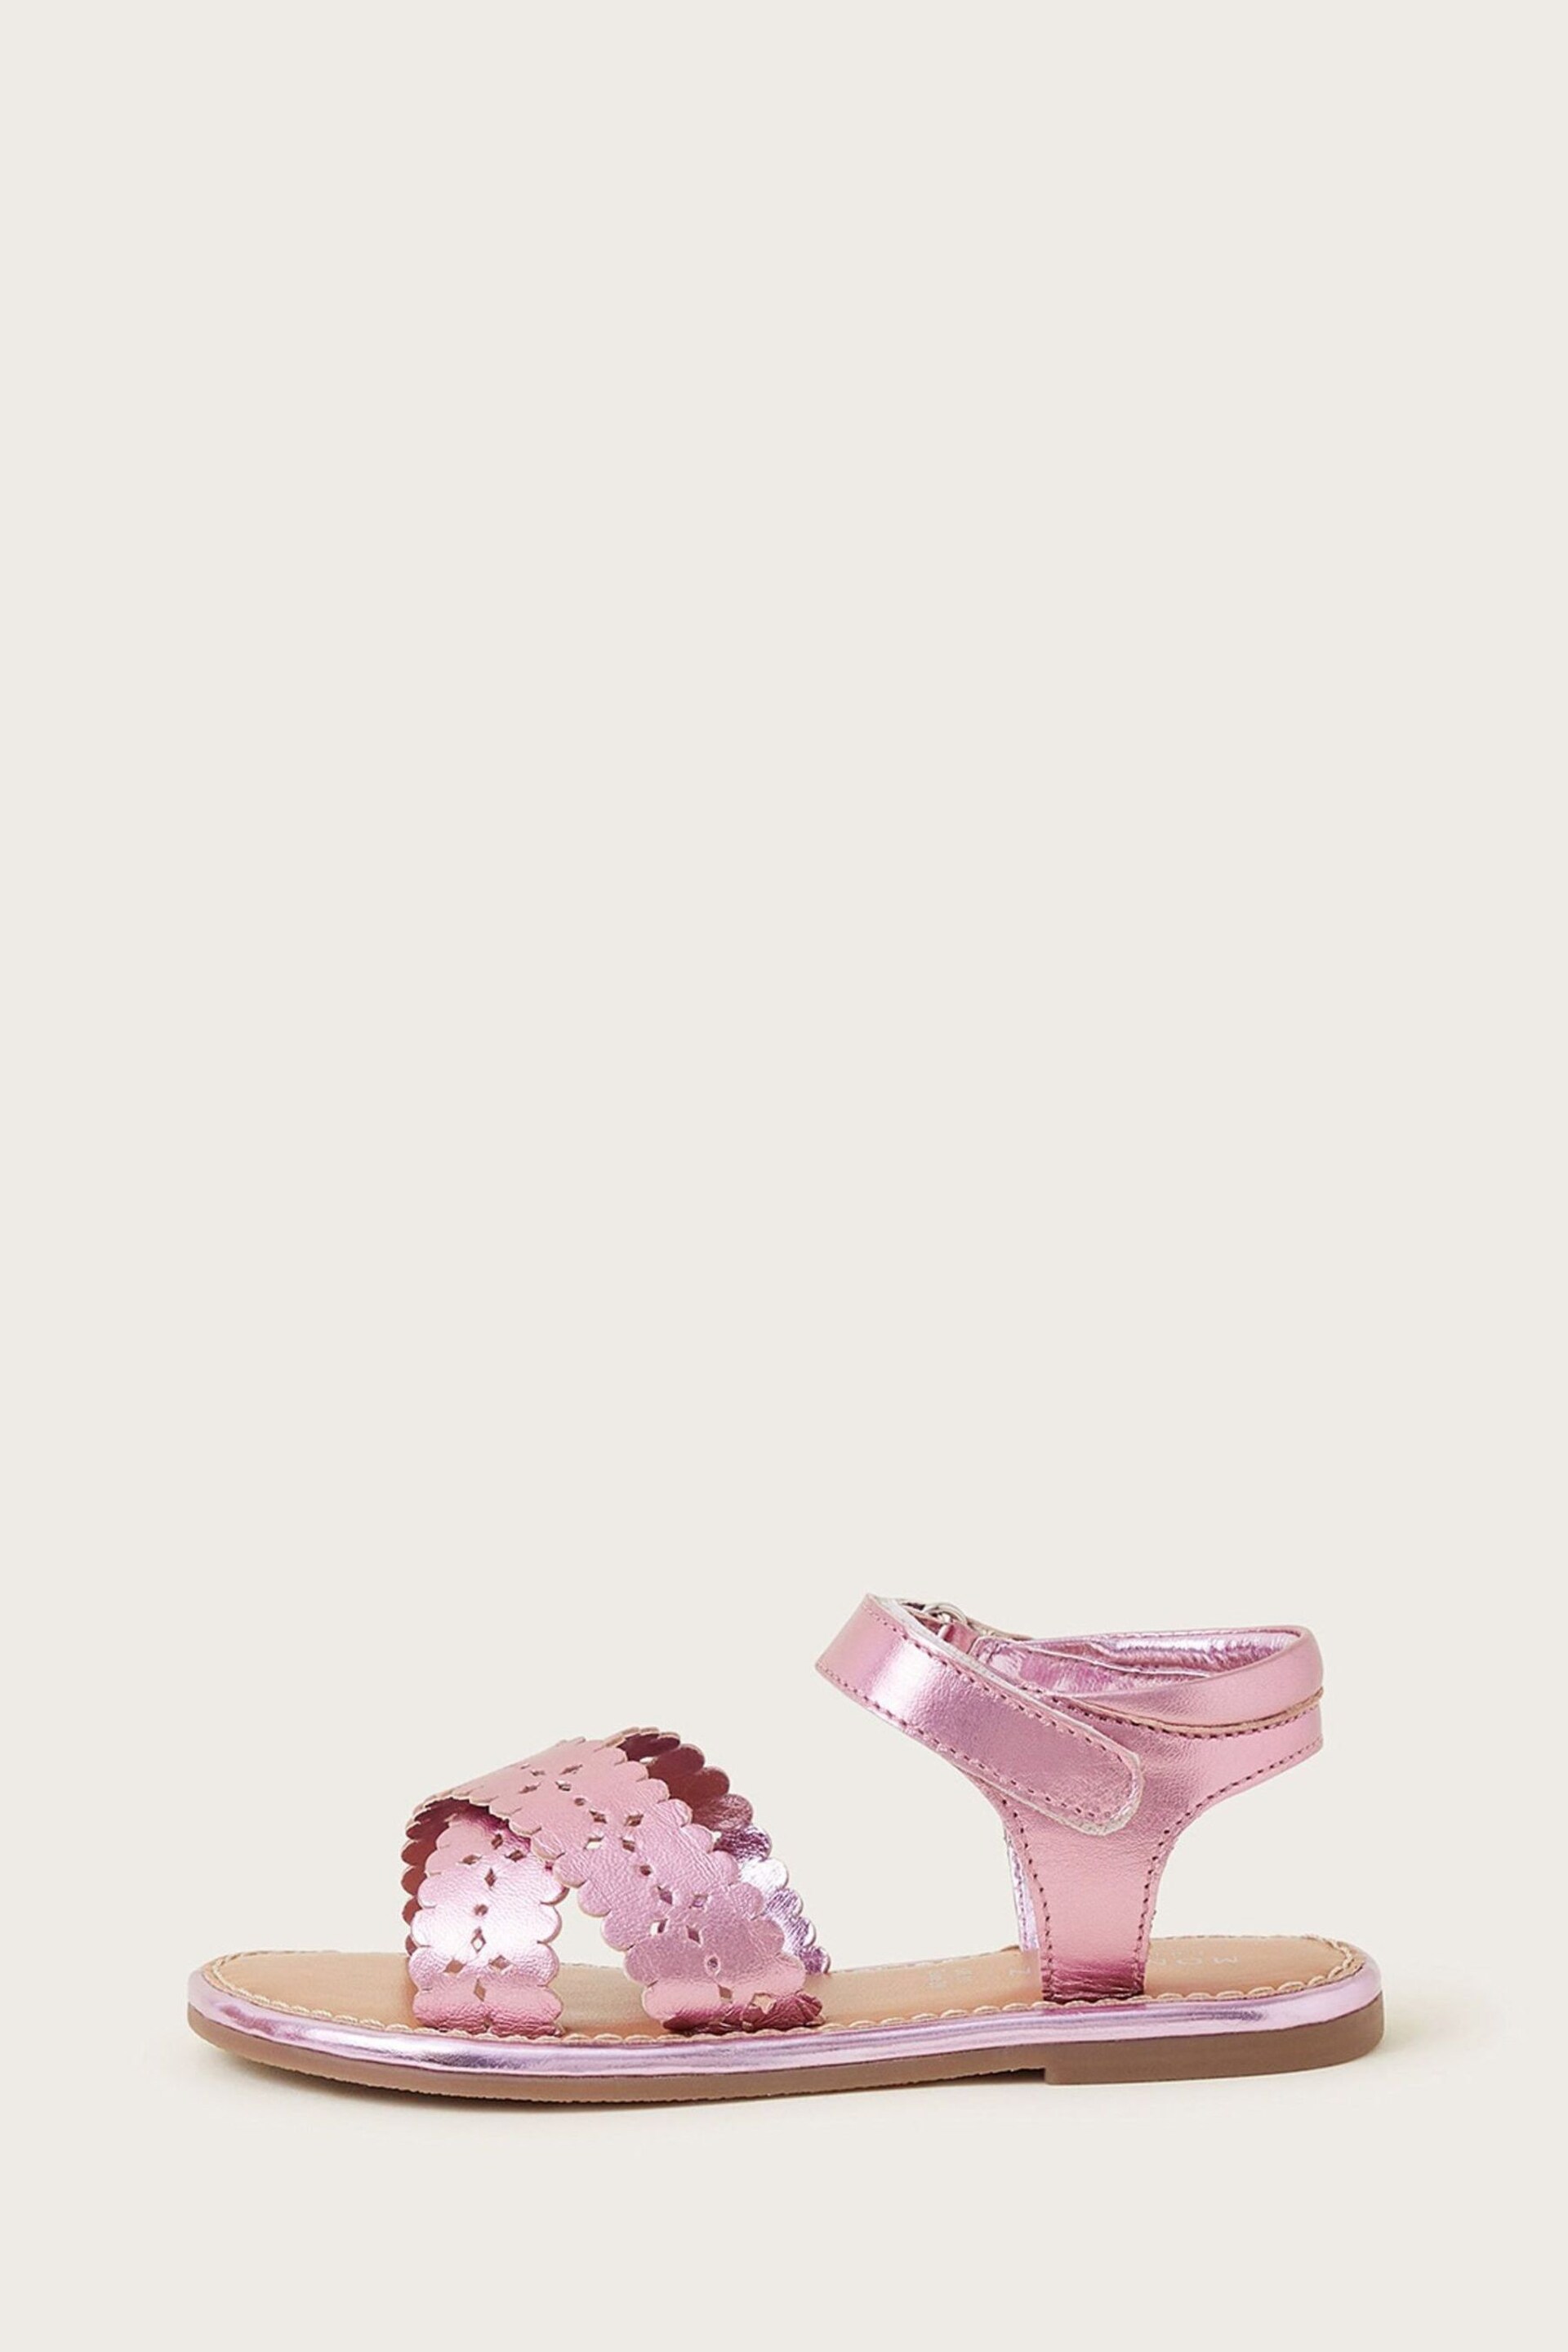 Monsoon Pink Leather Cutwork Sandals - Image 2 of 3